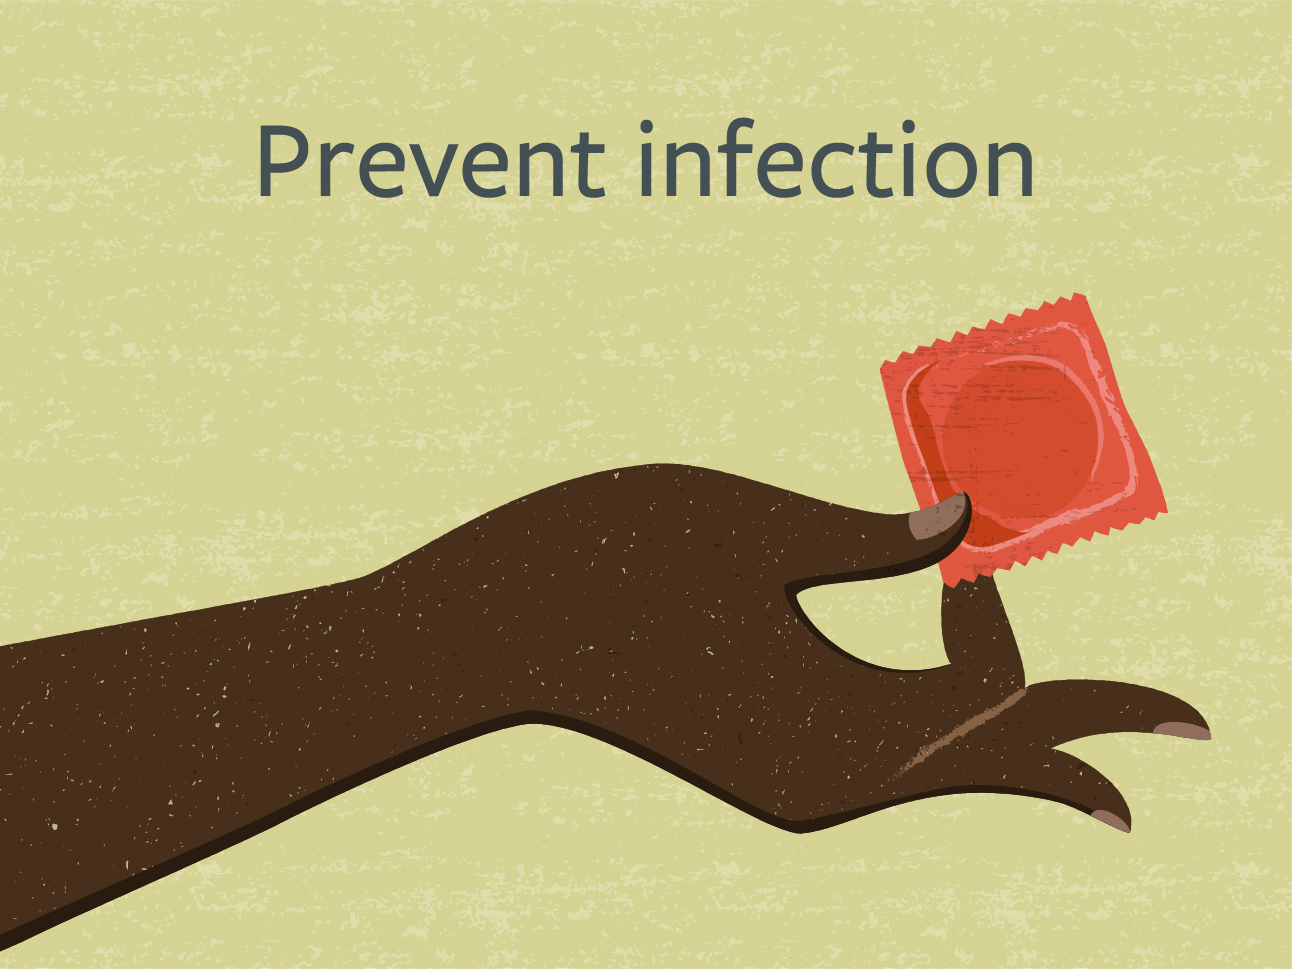 Prevent infection